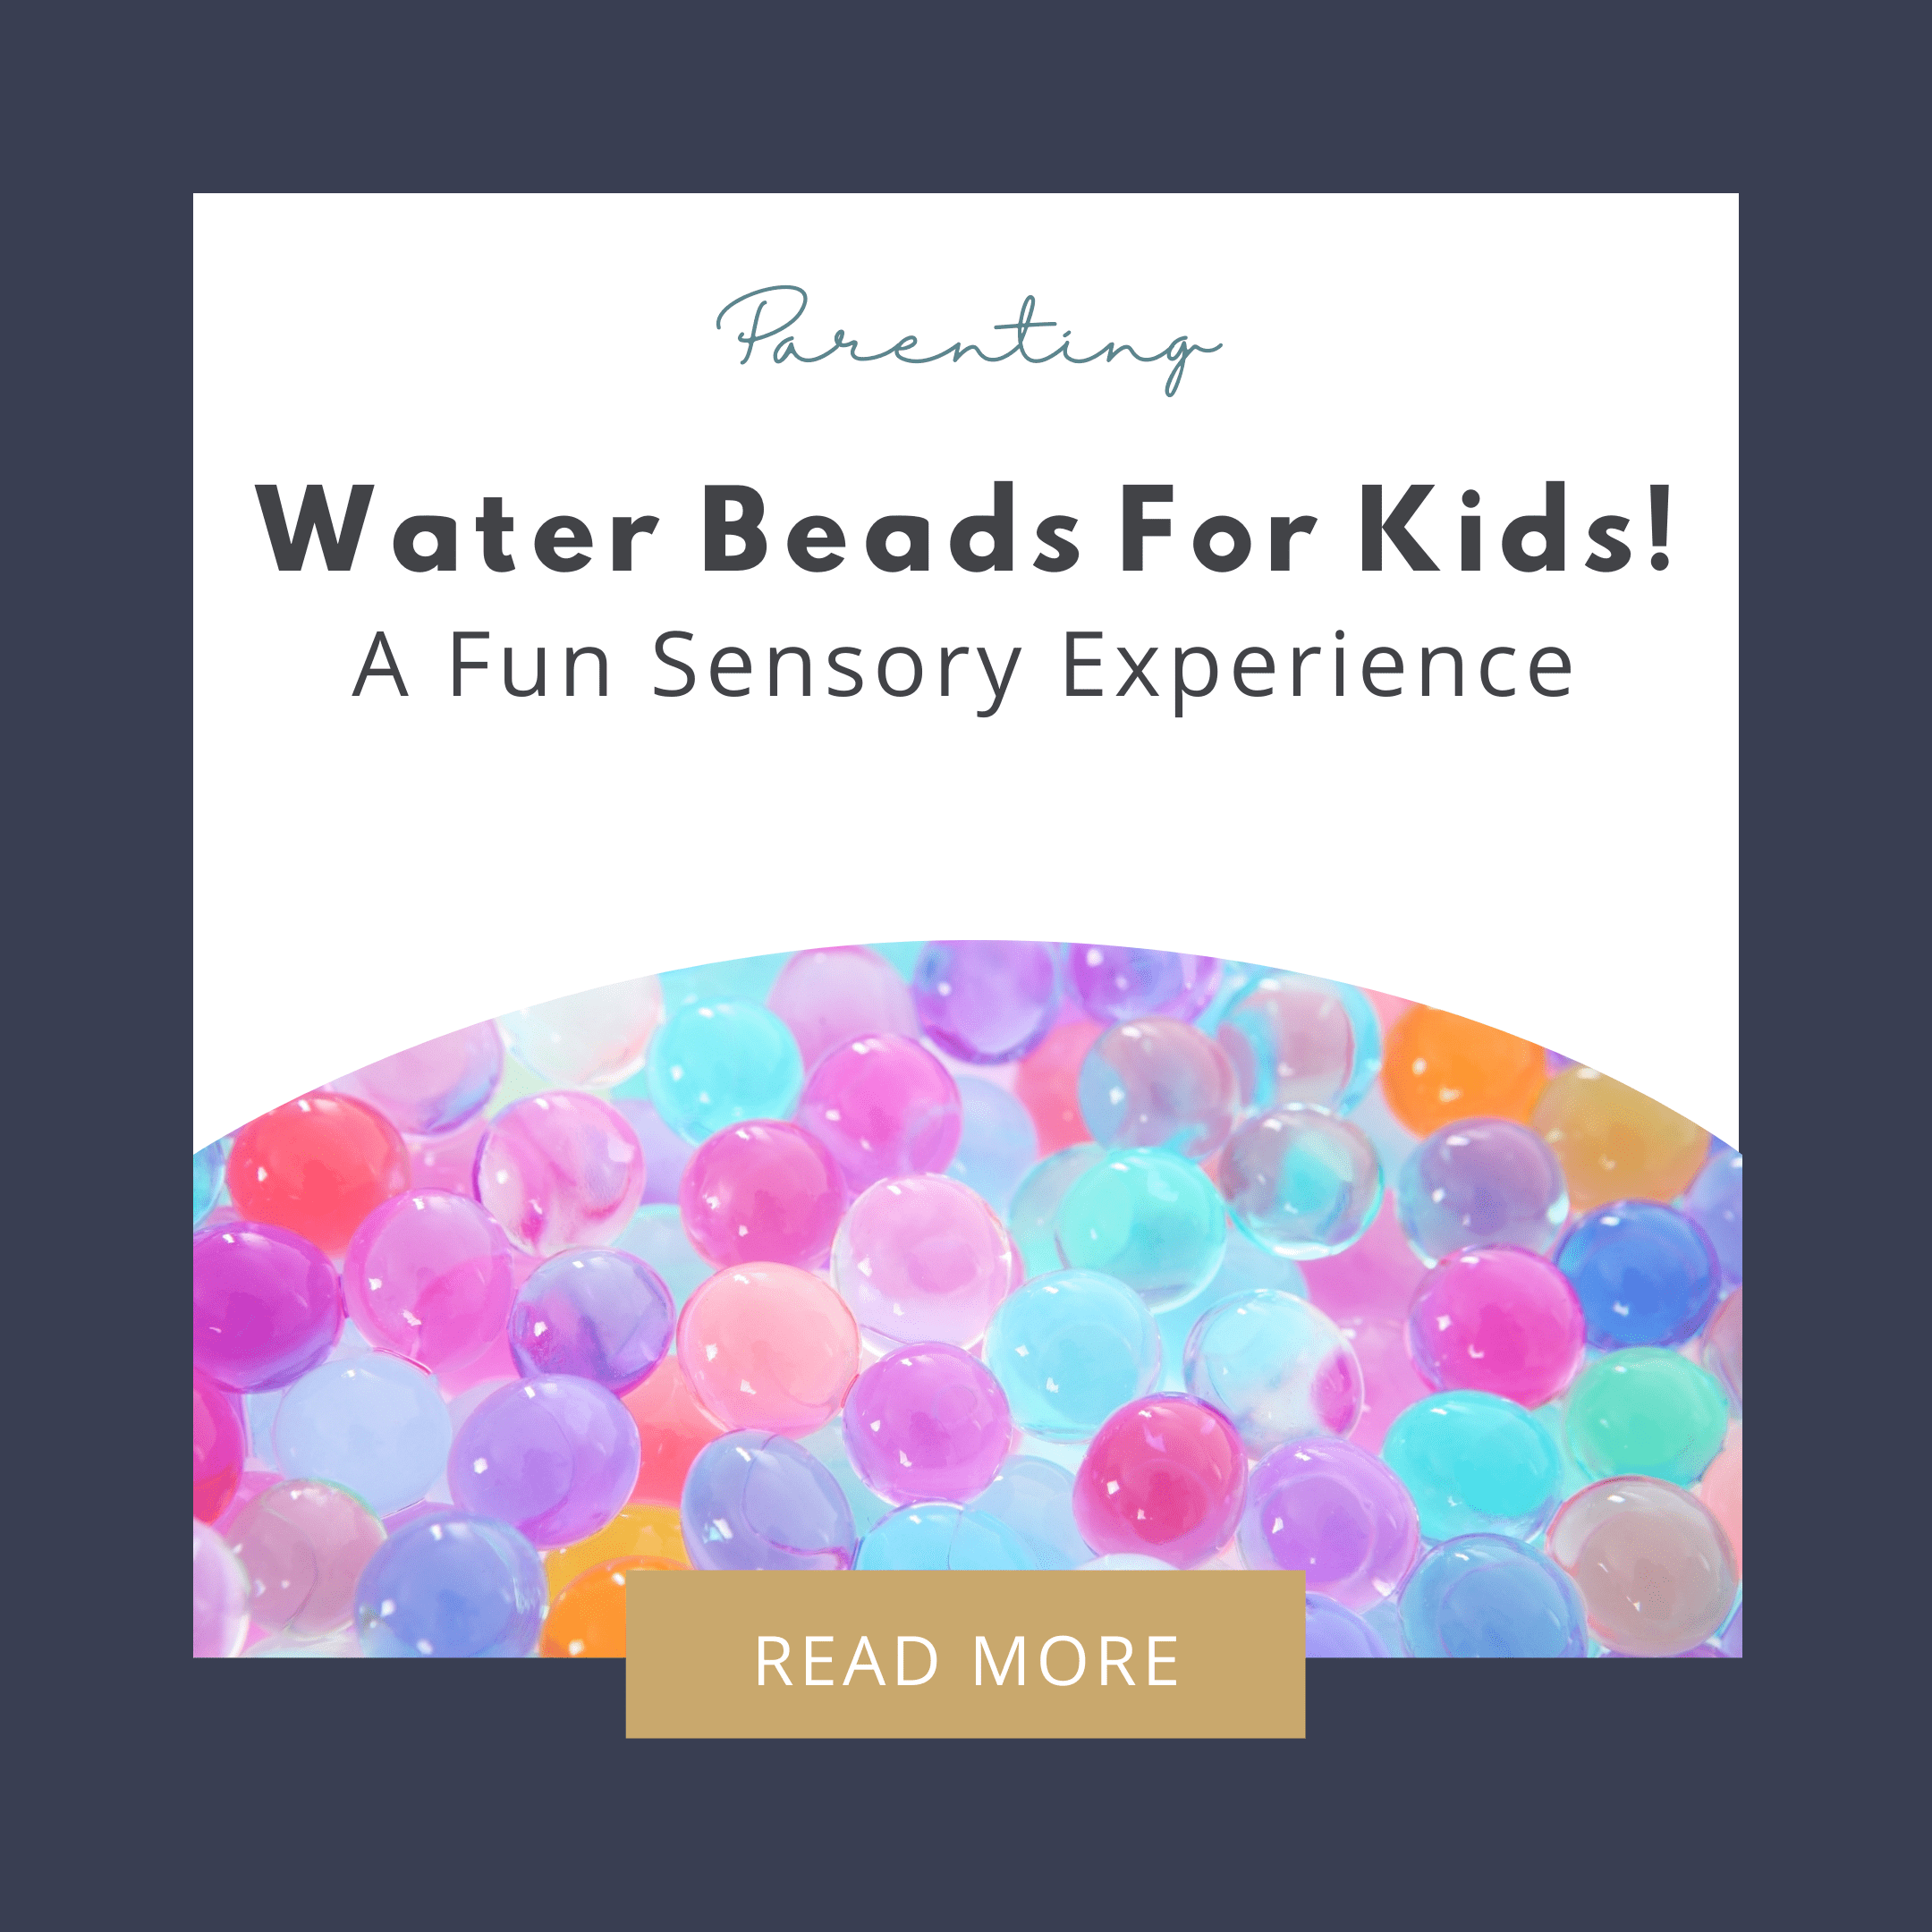 Water Beads for Kids! A Fun Sensory Experience